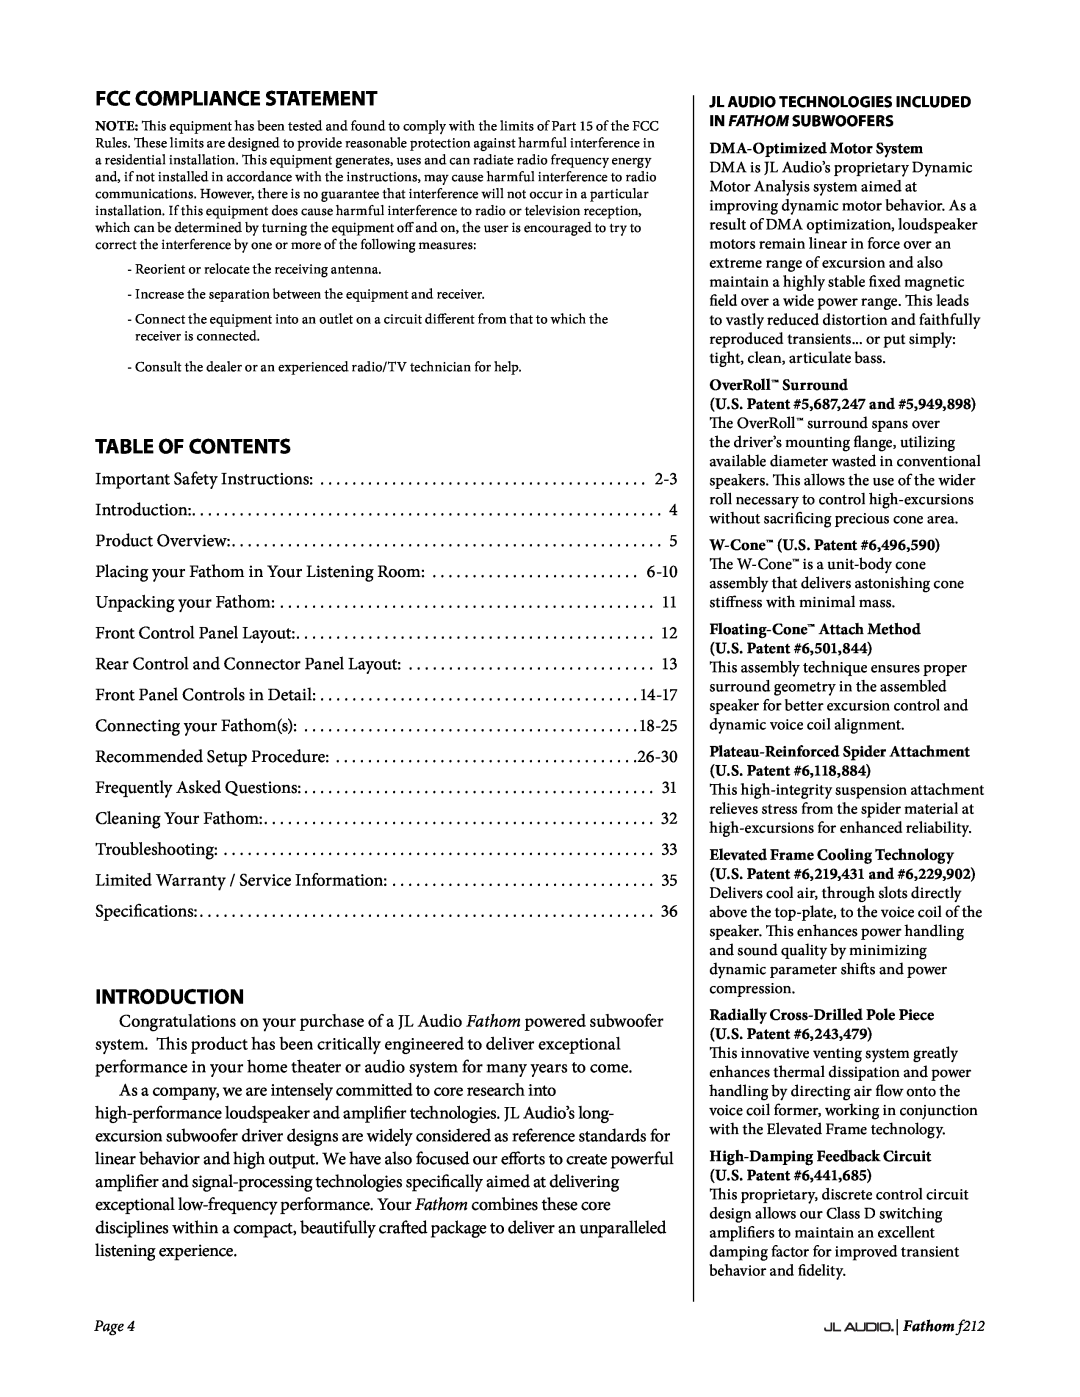 JL Audio f212 owner manual Fcc Compliance Statement, Table Of Contents, Introduction 